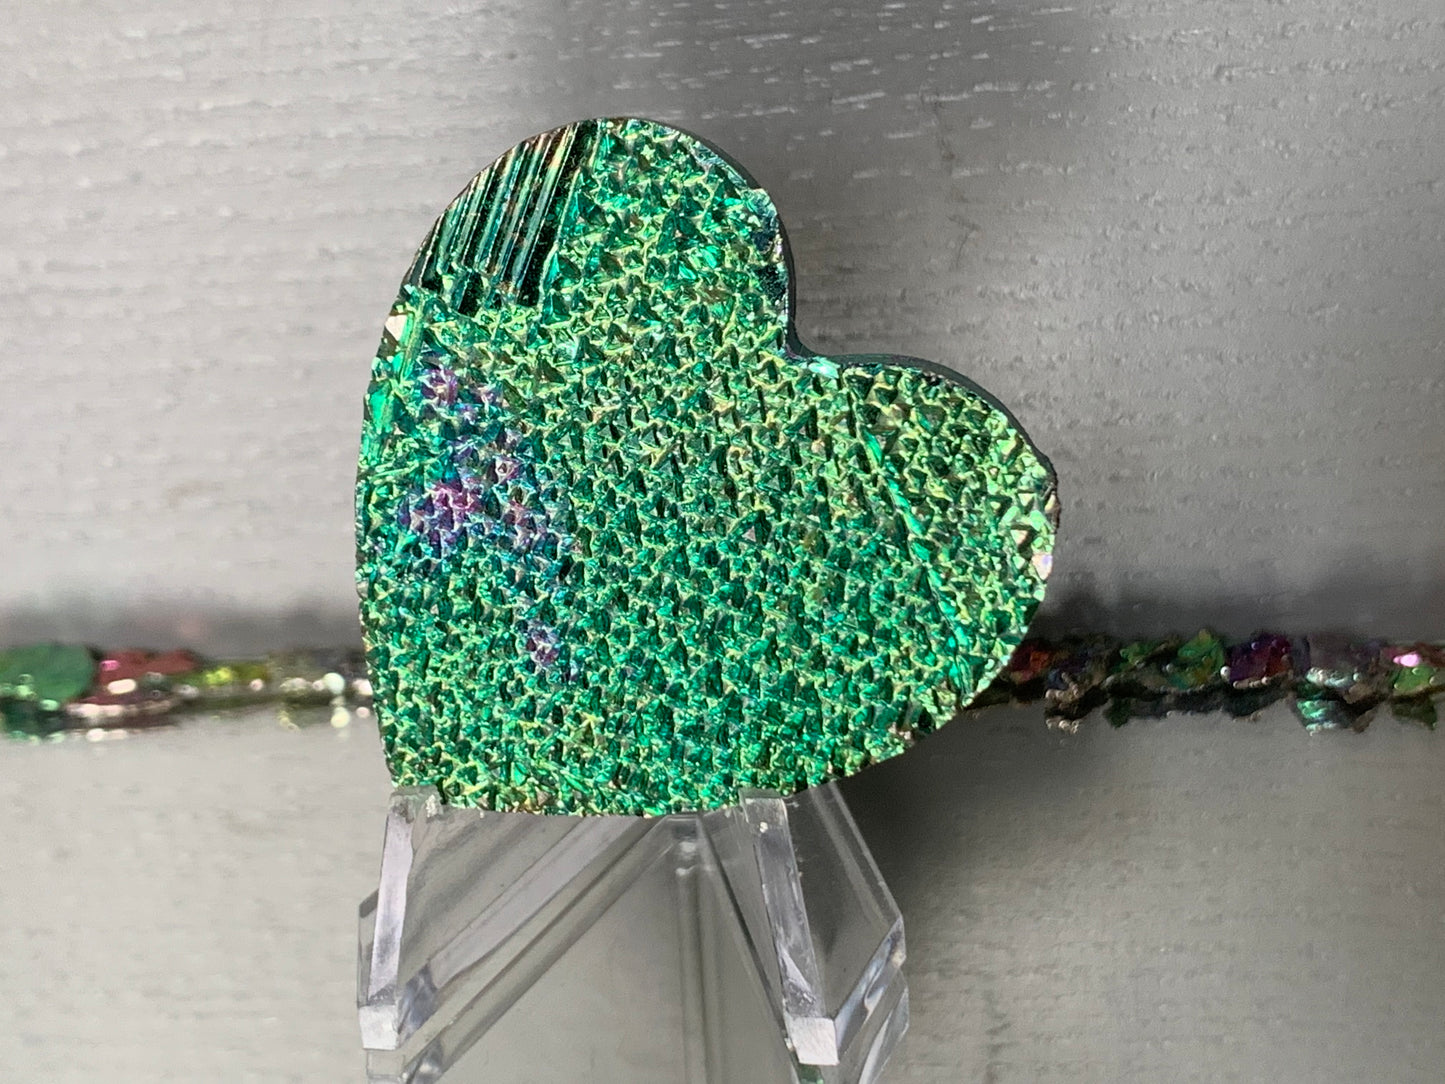 Green Bismuth Crystal Heart Cut Out Metal Art